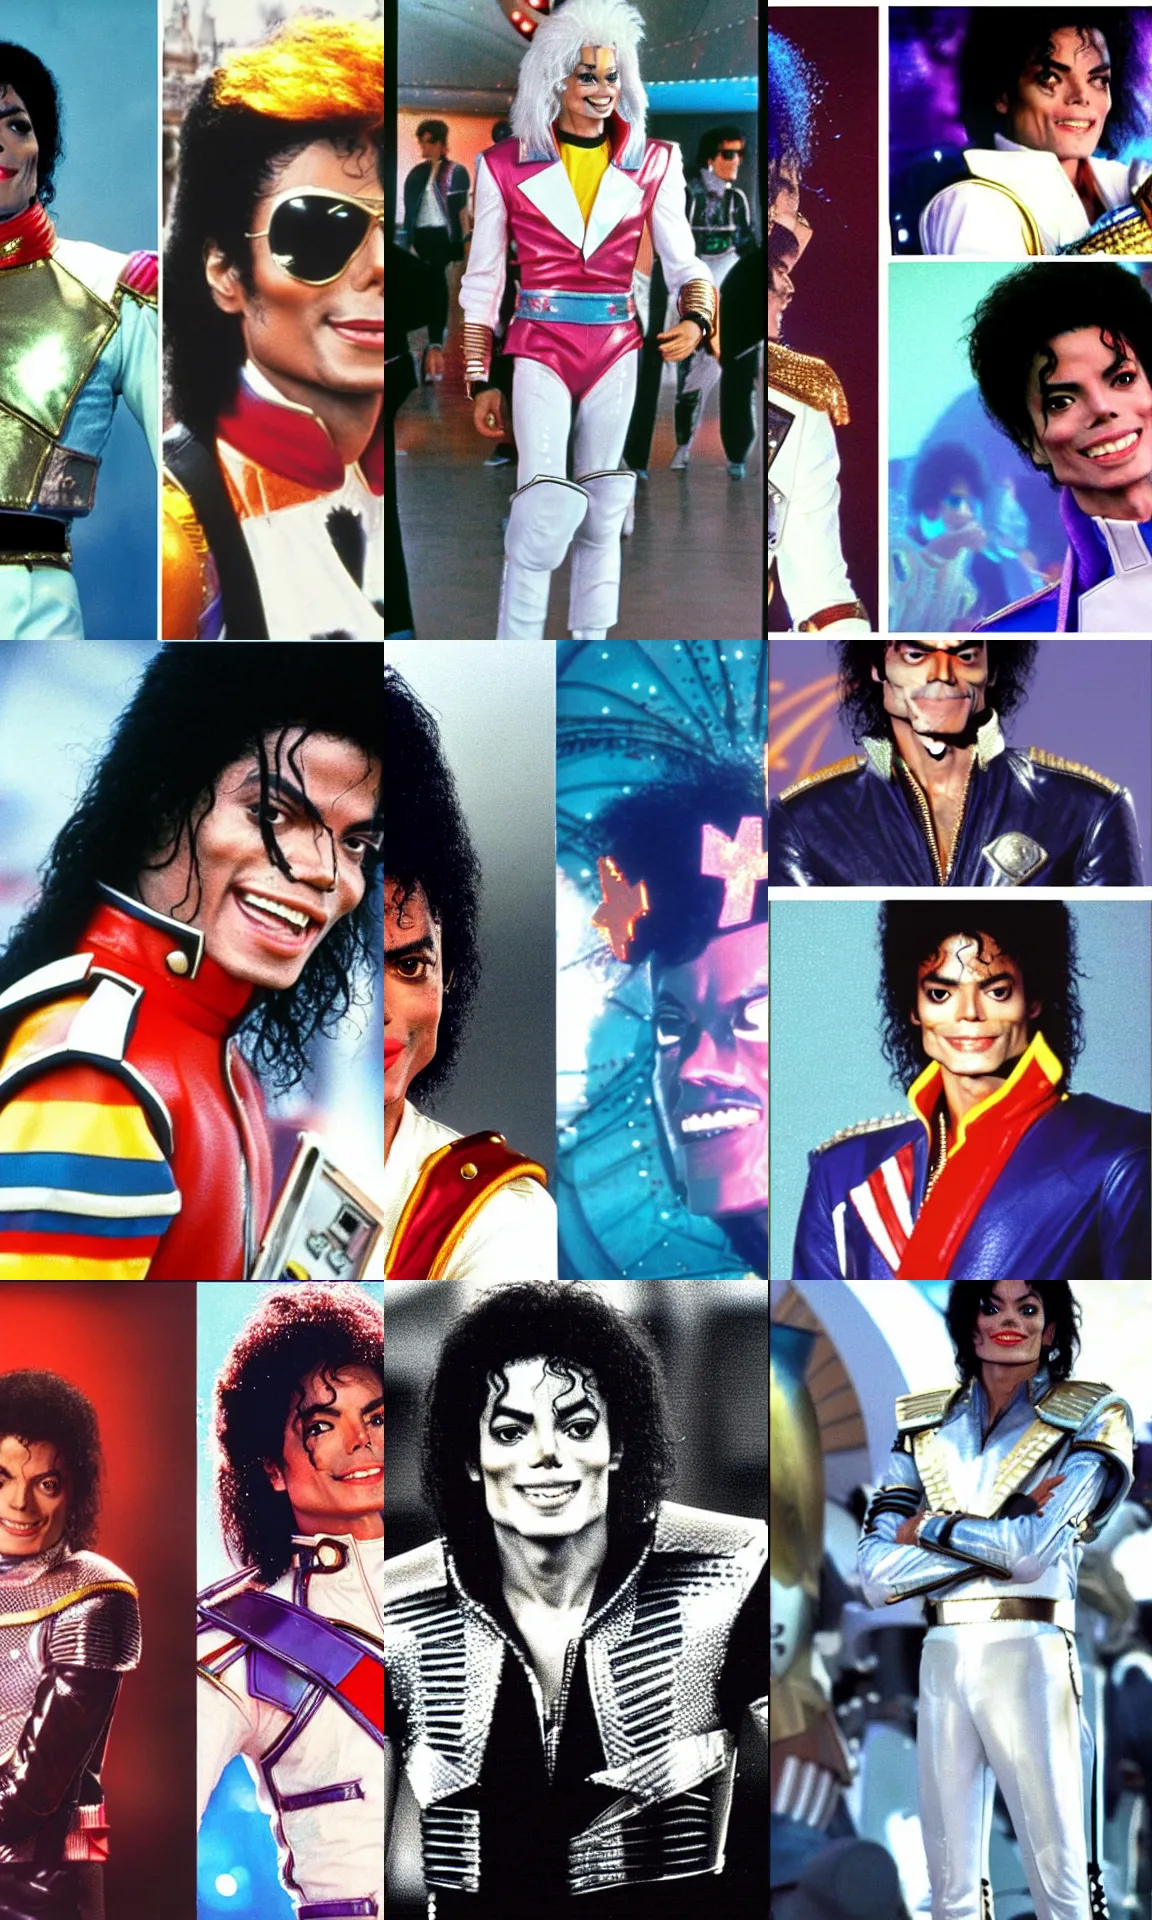 Prompt: 1 9 8 6 photo of michael jackson in 1 9 8 6 as captain eo in 1 9 8 6 in tomorrowland in 1 9 8 6 at disneyland in 1 9 8 6